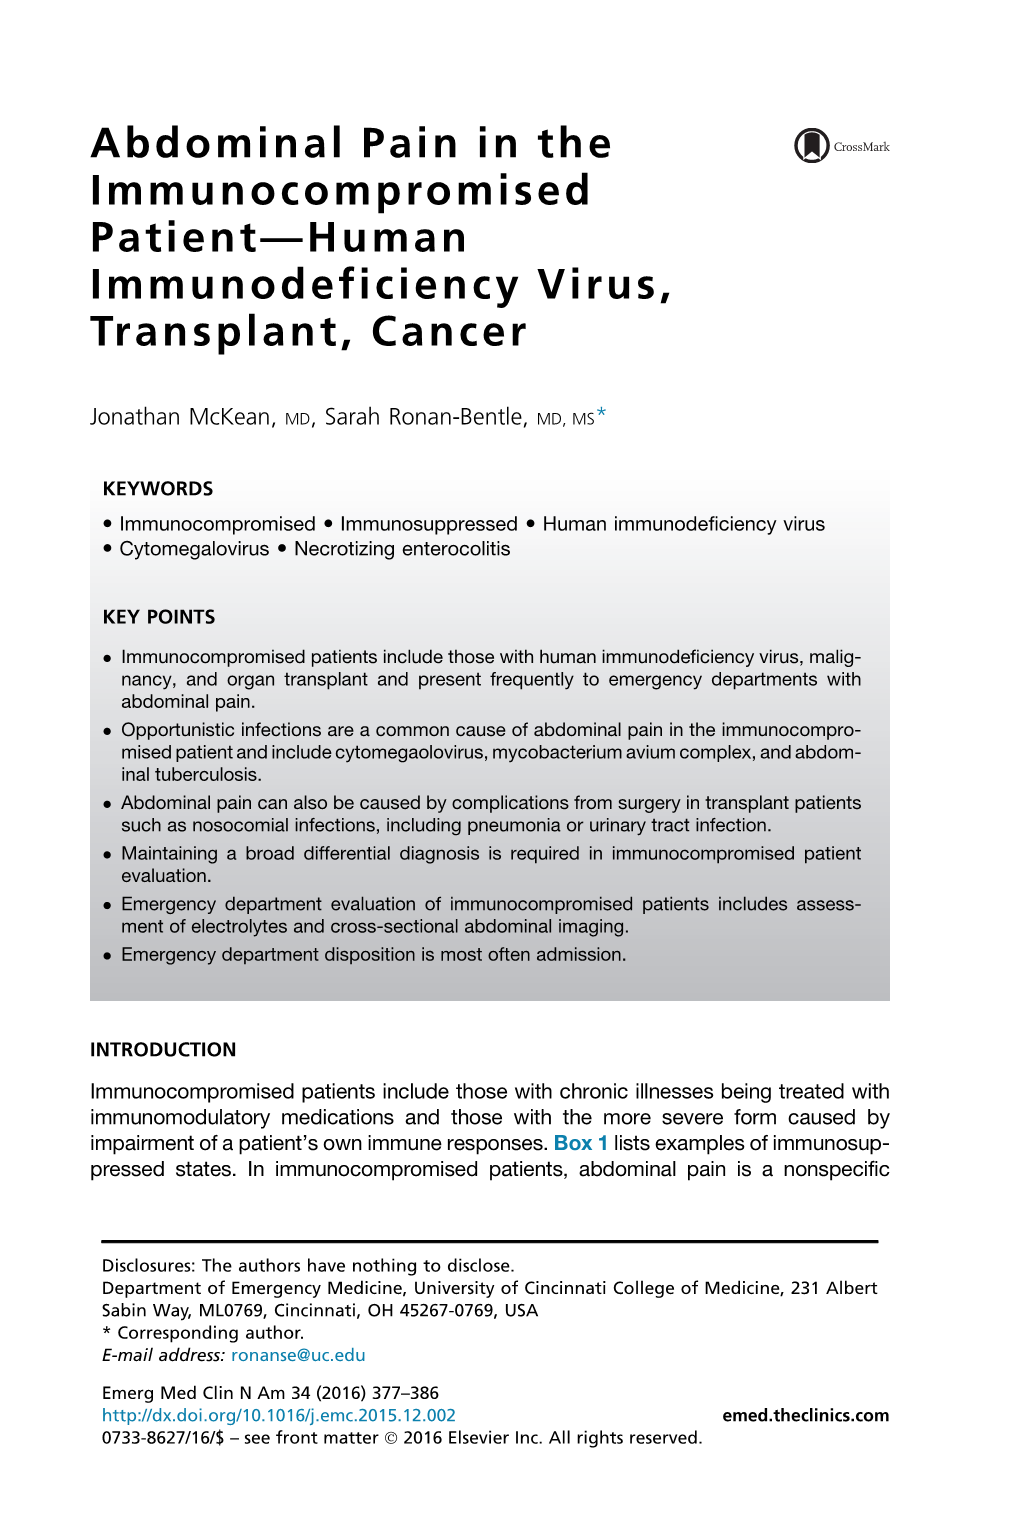 Abdominal Pain in the Immunocompromised Patient—Human Immunodeficiency Virus, Transplant, Cancer